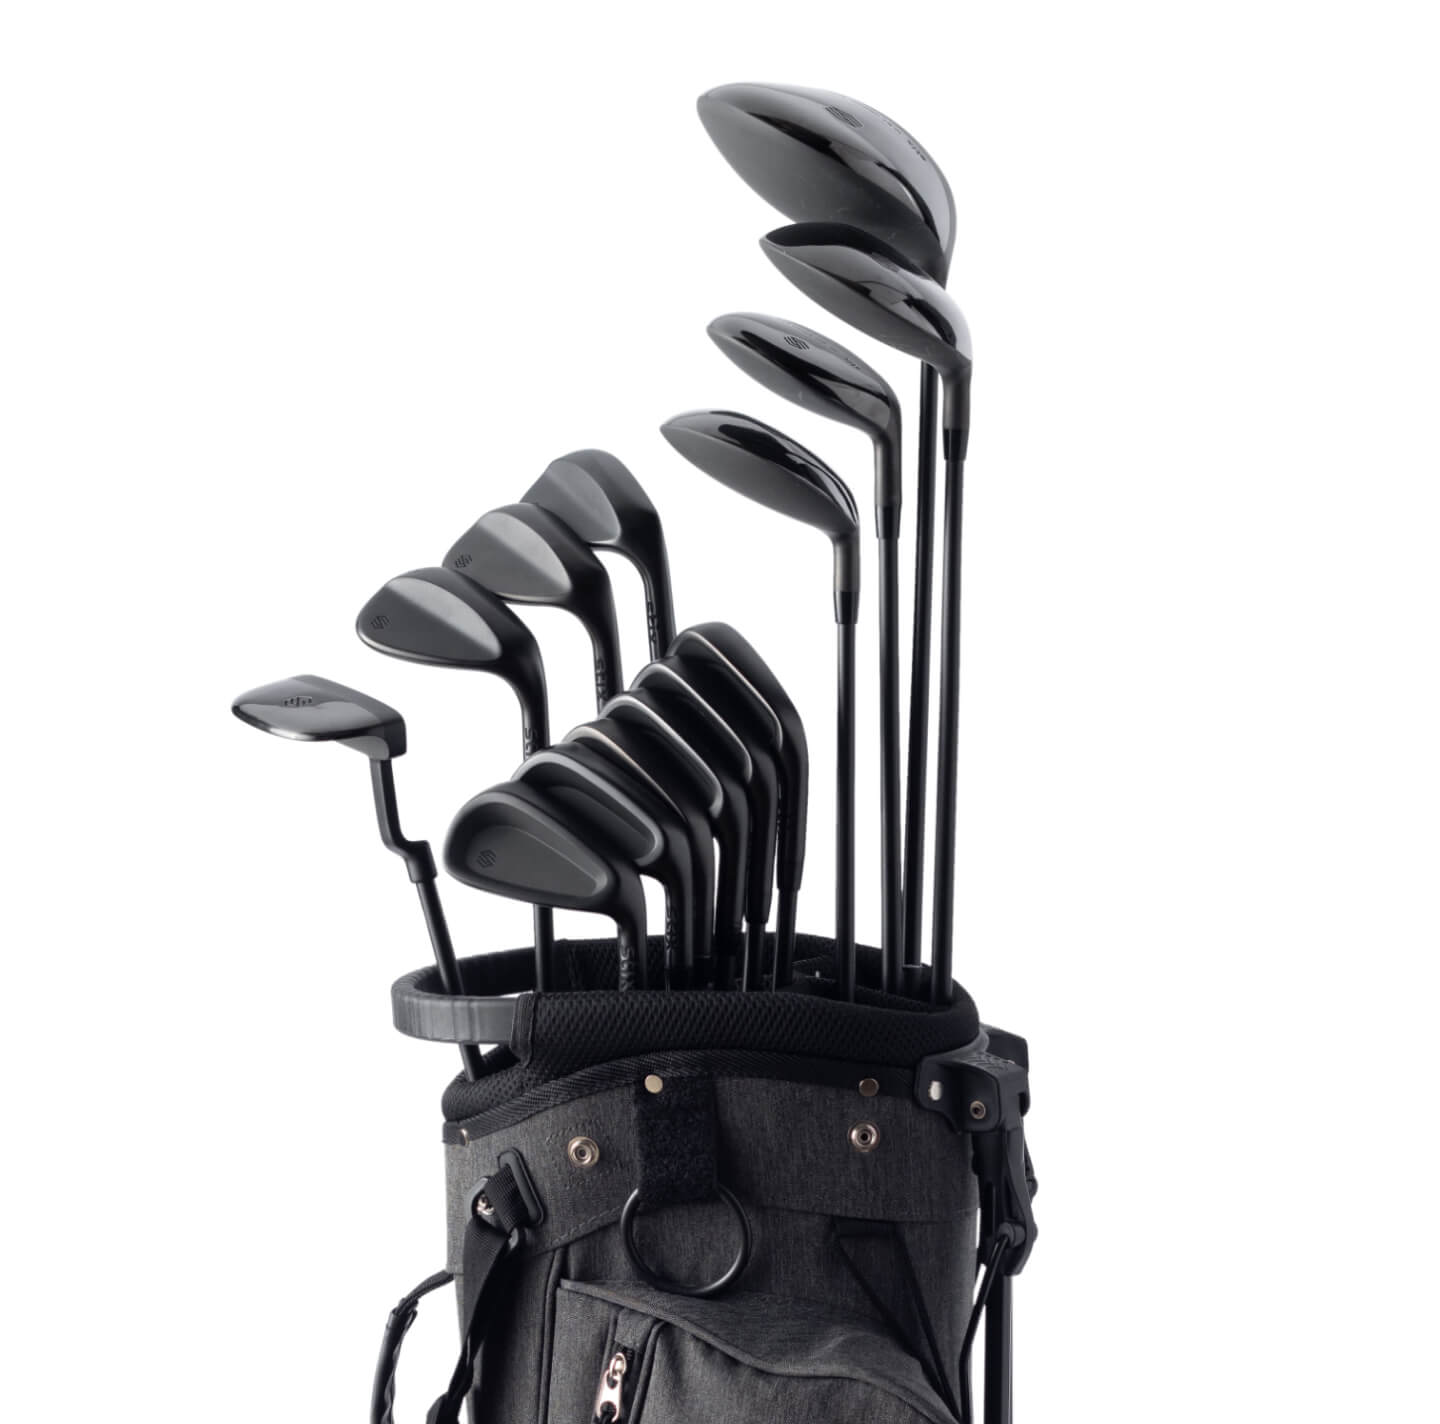 How many clubs can you have in your golf bag?